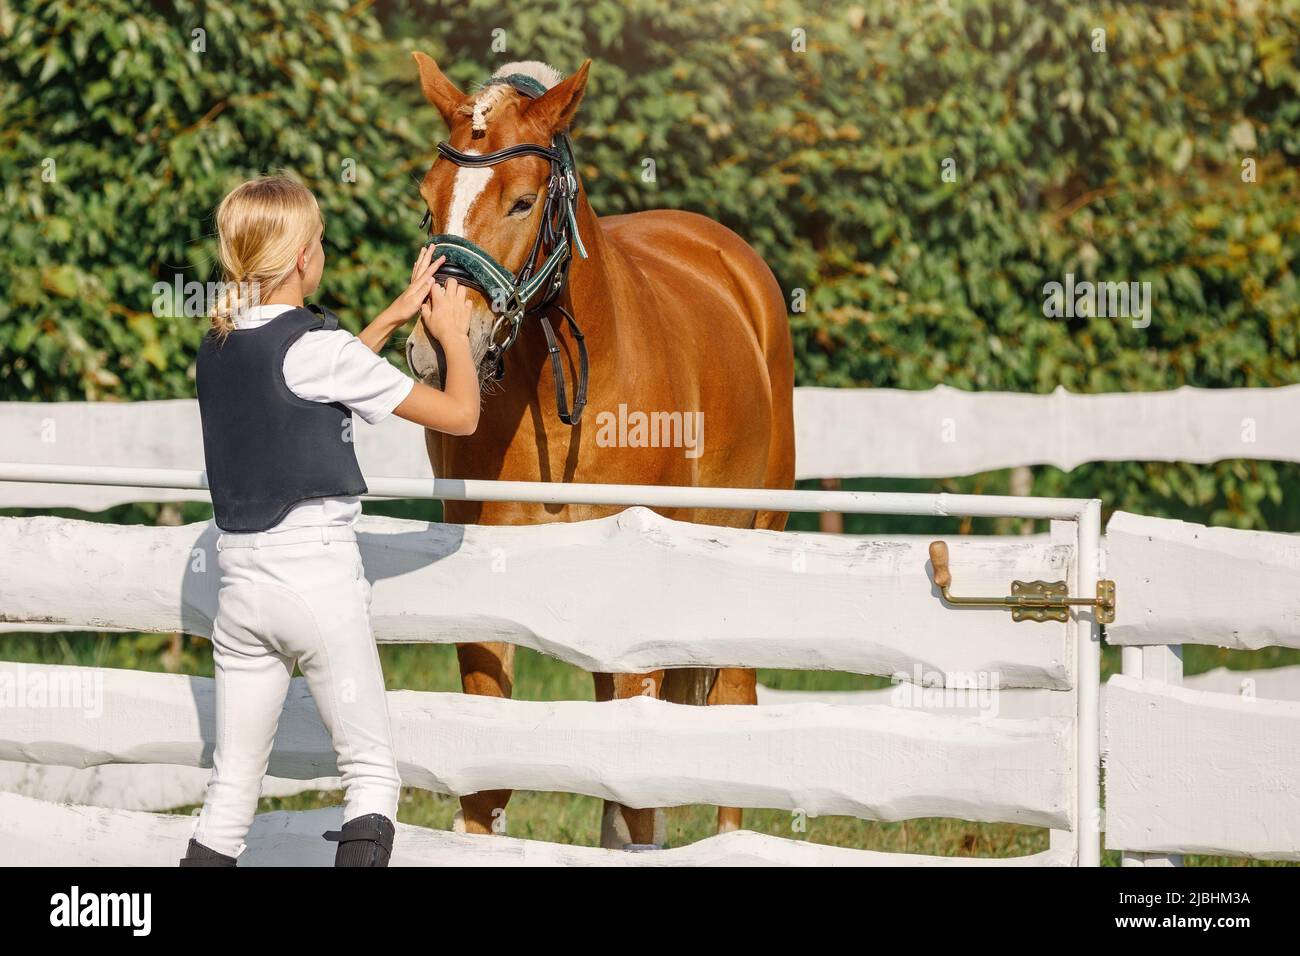 Young beautiful girl in riding gear with horse, she reaching up to stroke her horse on the nose. Stock Photo